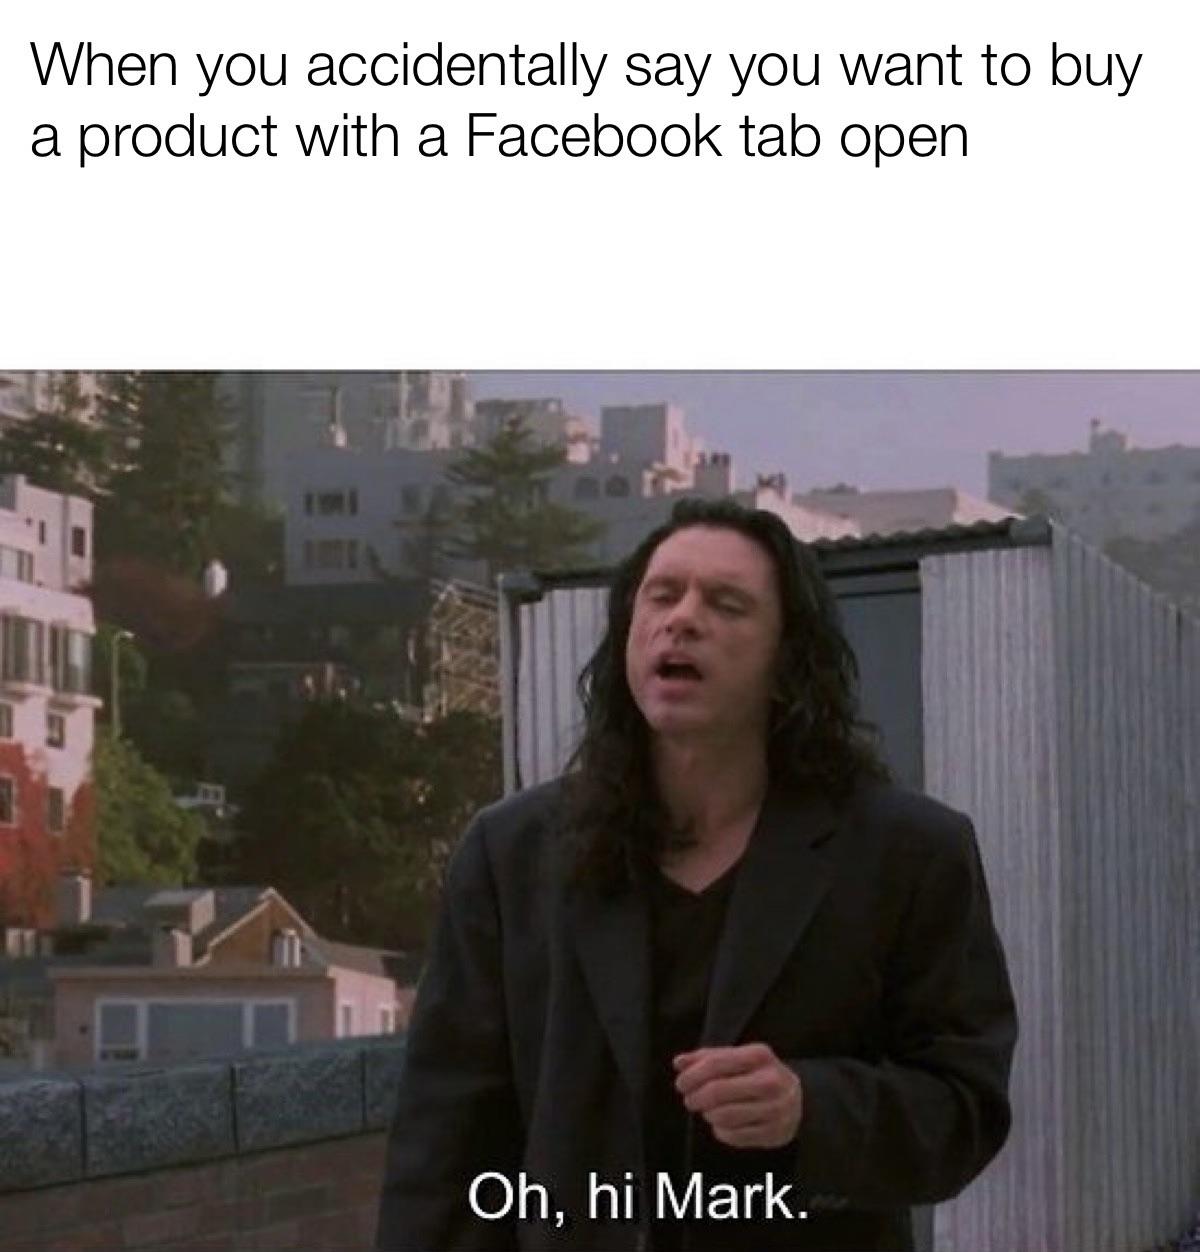 hilarious memes - oh hai mark - When you accidentally say you want to buy a product with a Facebook tab open Oh, hi Mark.